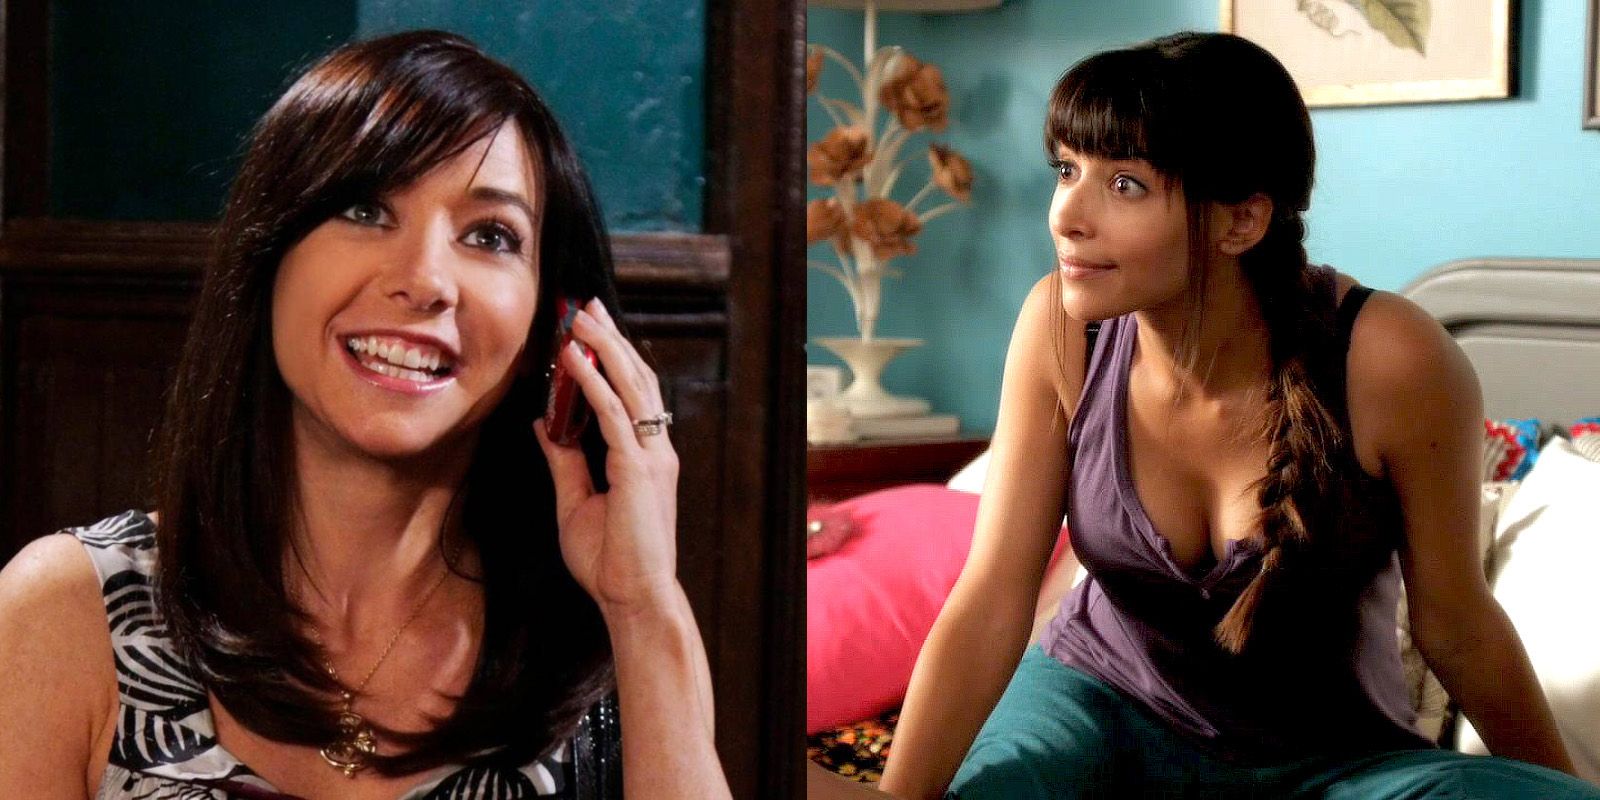 Lily in How I Met Your Mother and Cece in New Girl.